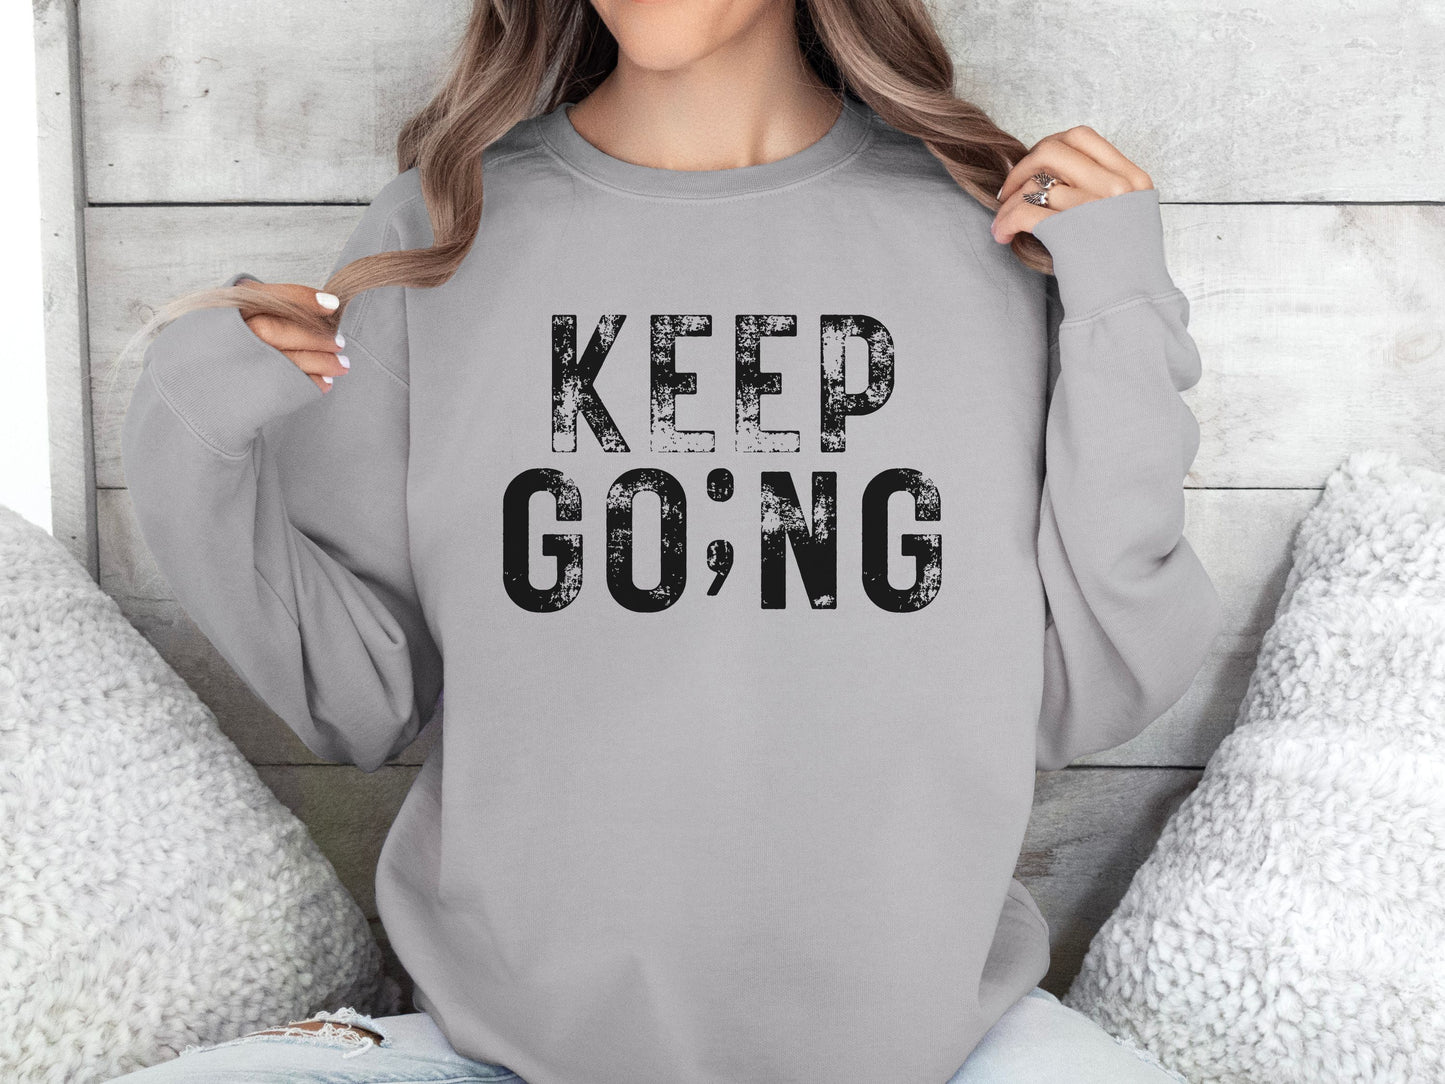 Comfort Colors Sweatshirt - "Keep Going" - Motivational Apparel for Everyday Inspiration